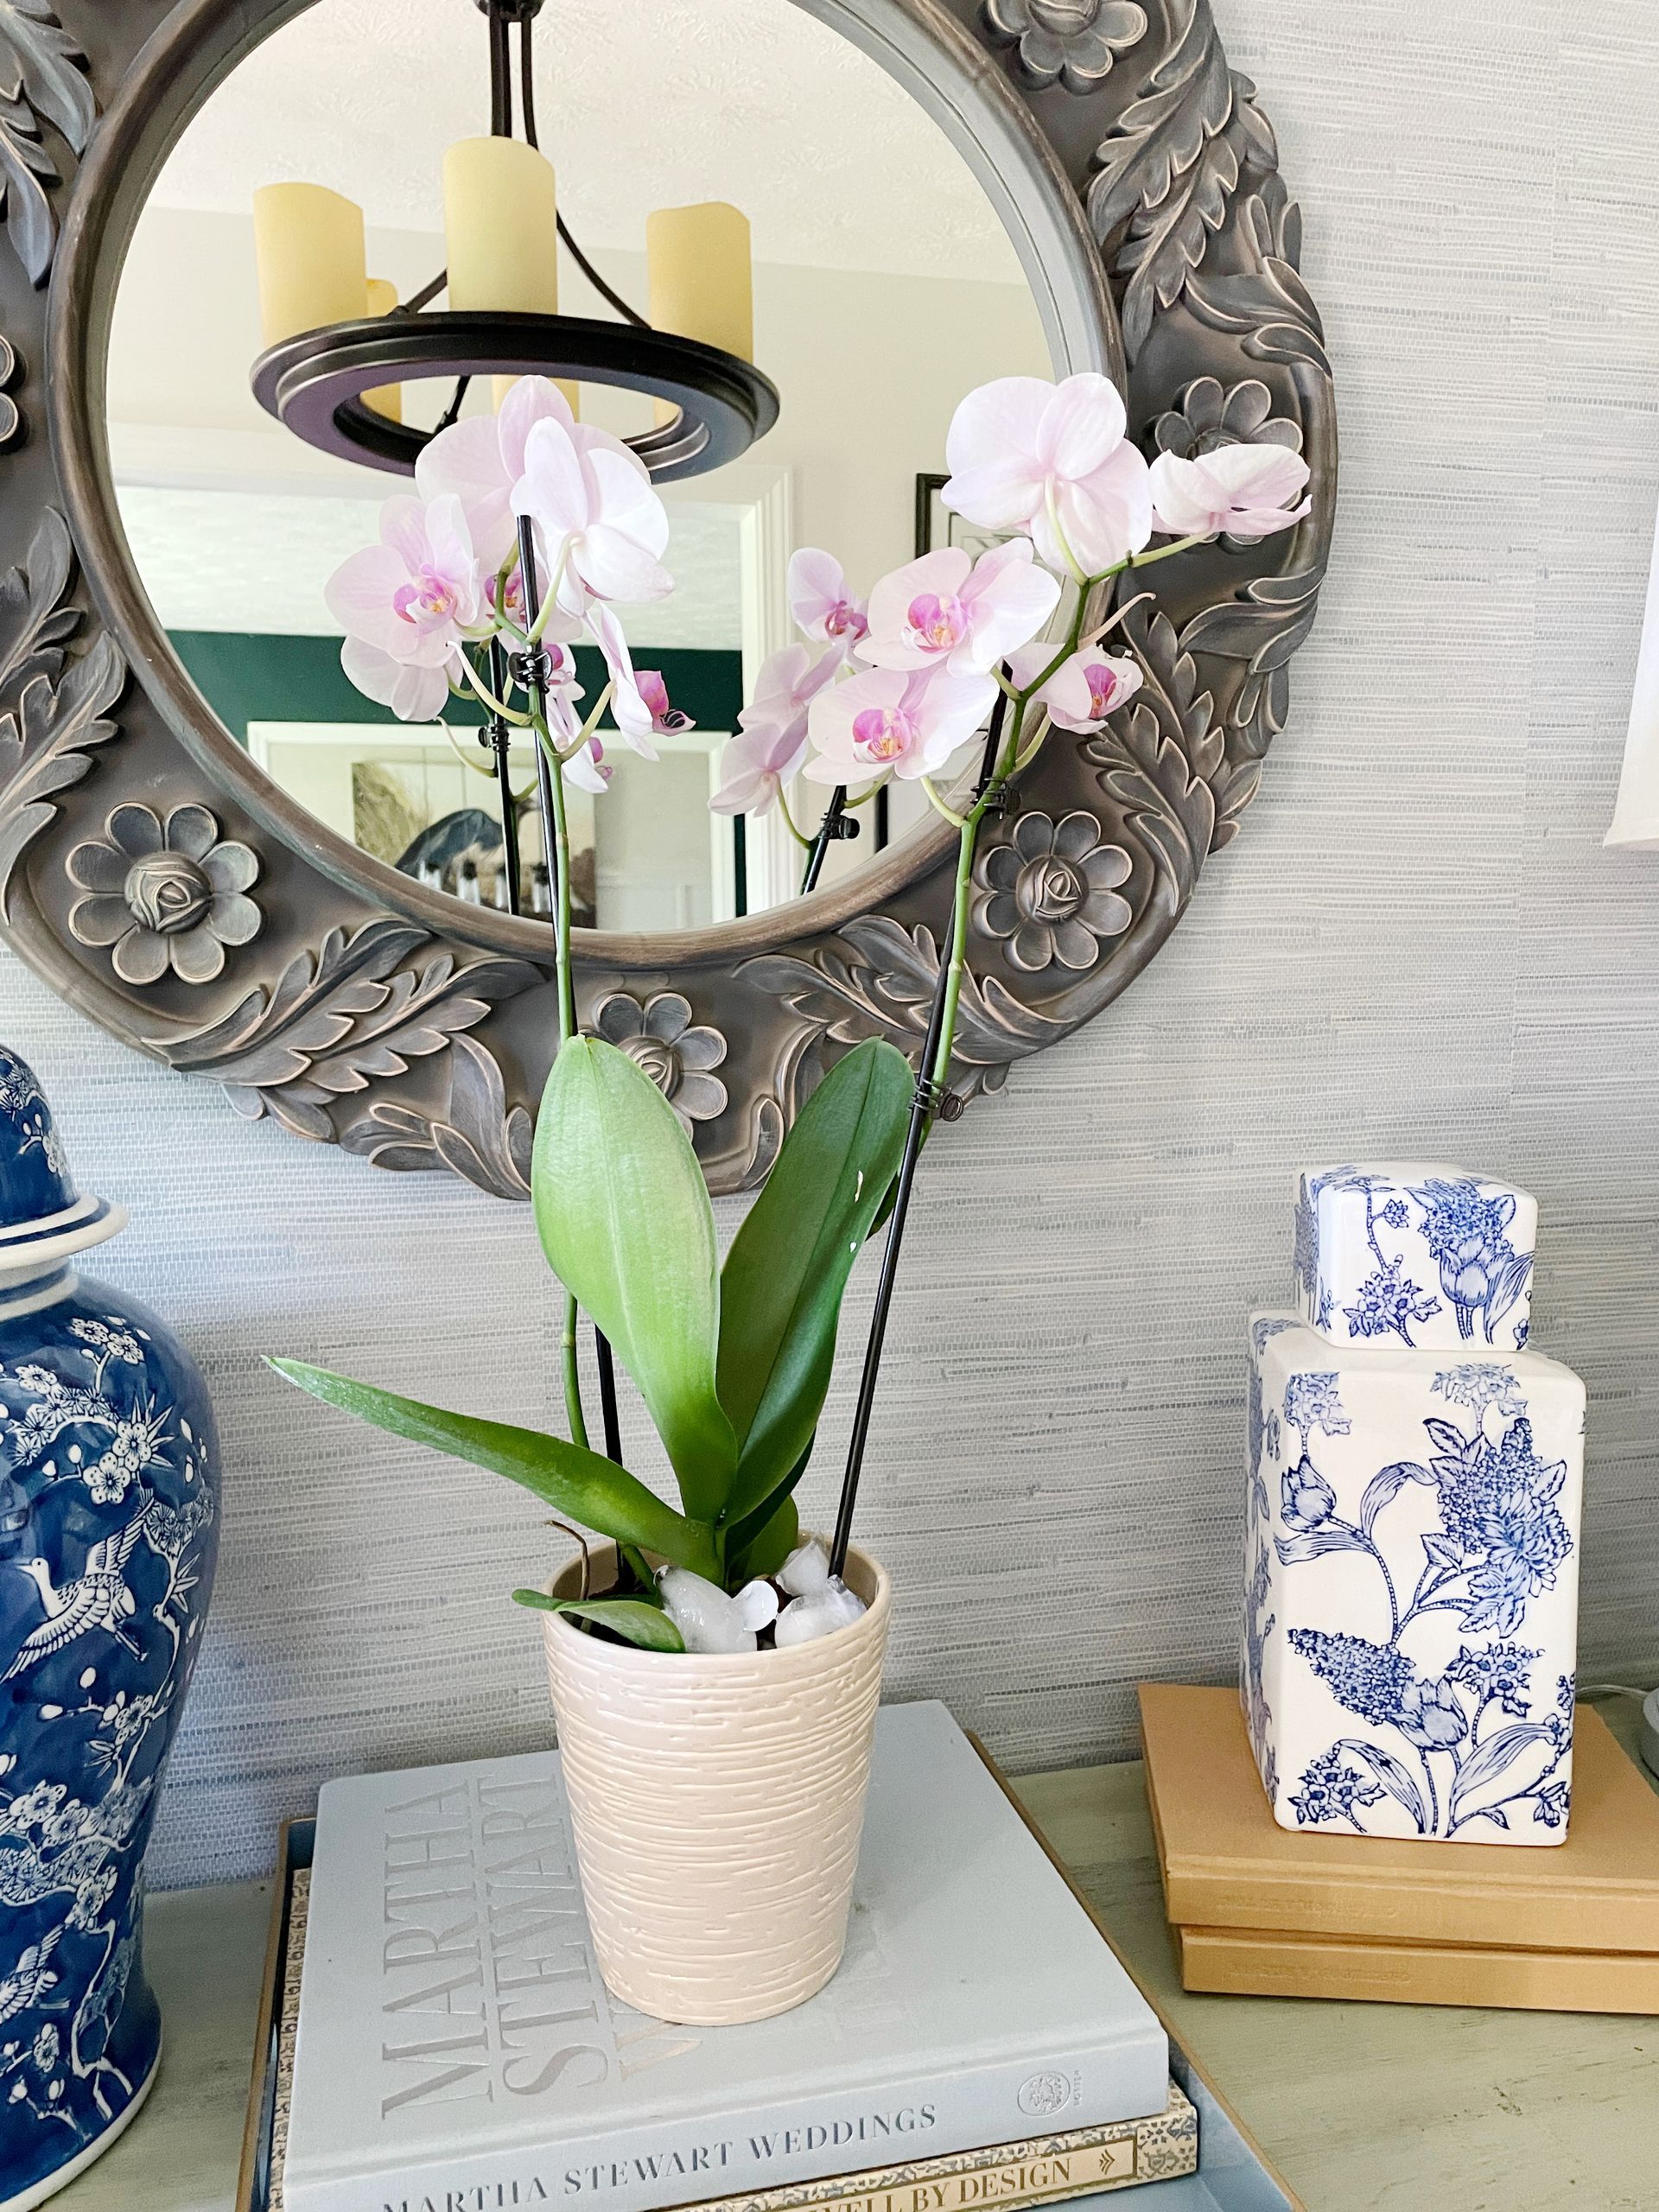 Orchid with grasscloth wallpaper and blue and white pottery